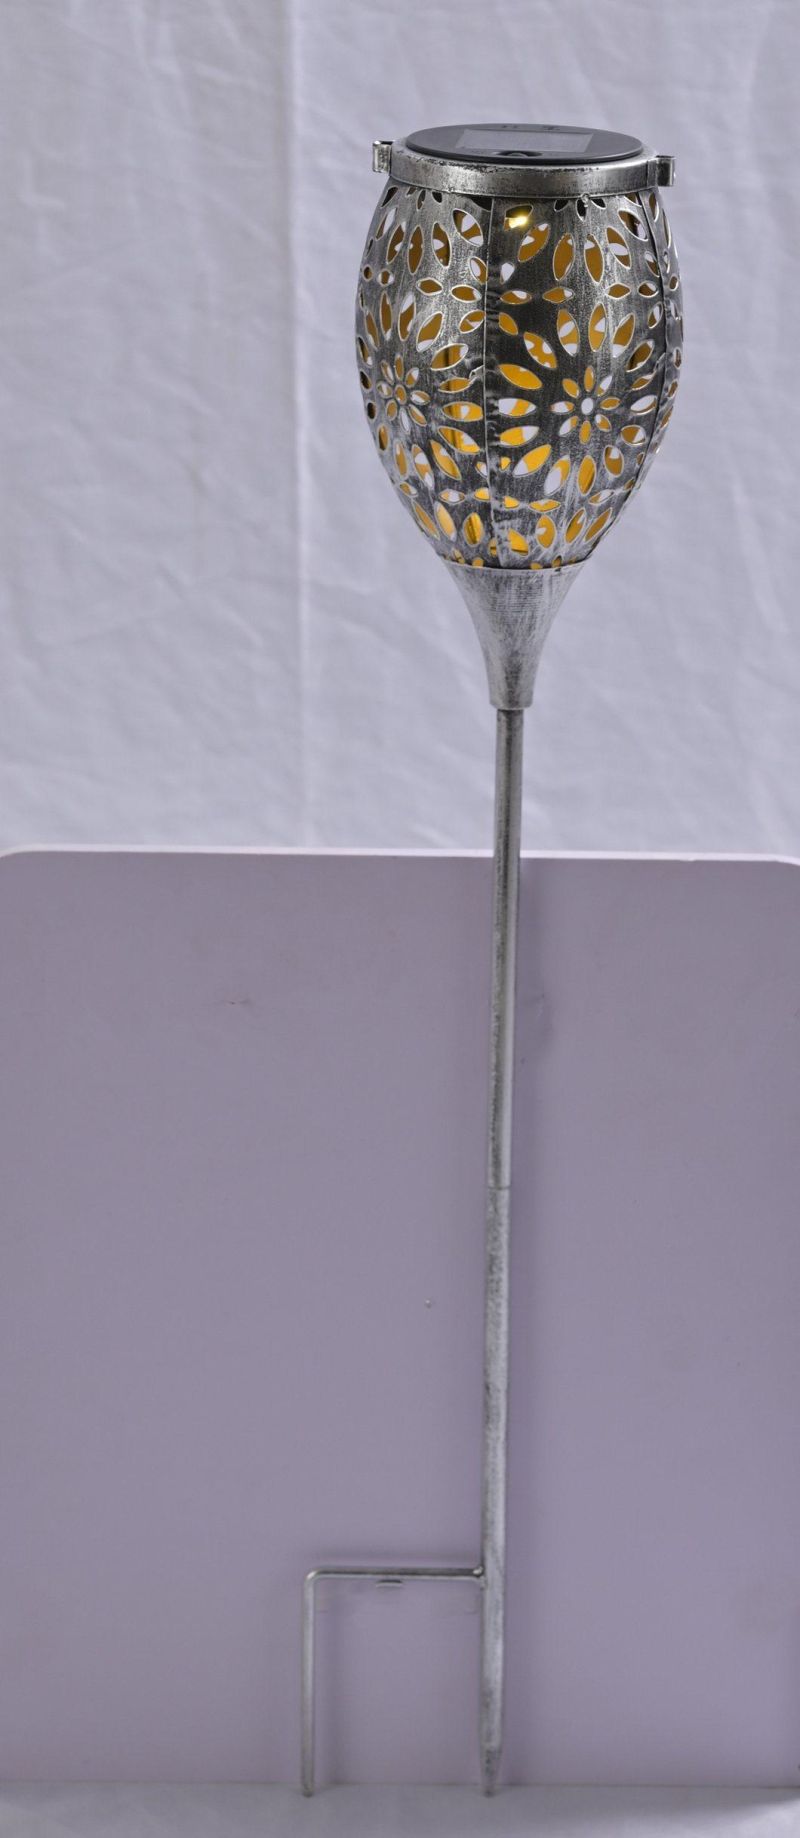 Metal Solar Stake Light with Flame Effect (flower pattern)